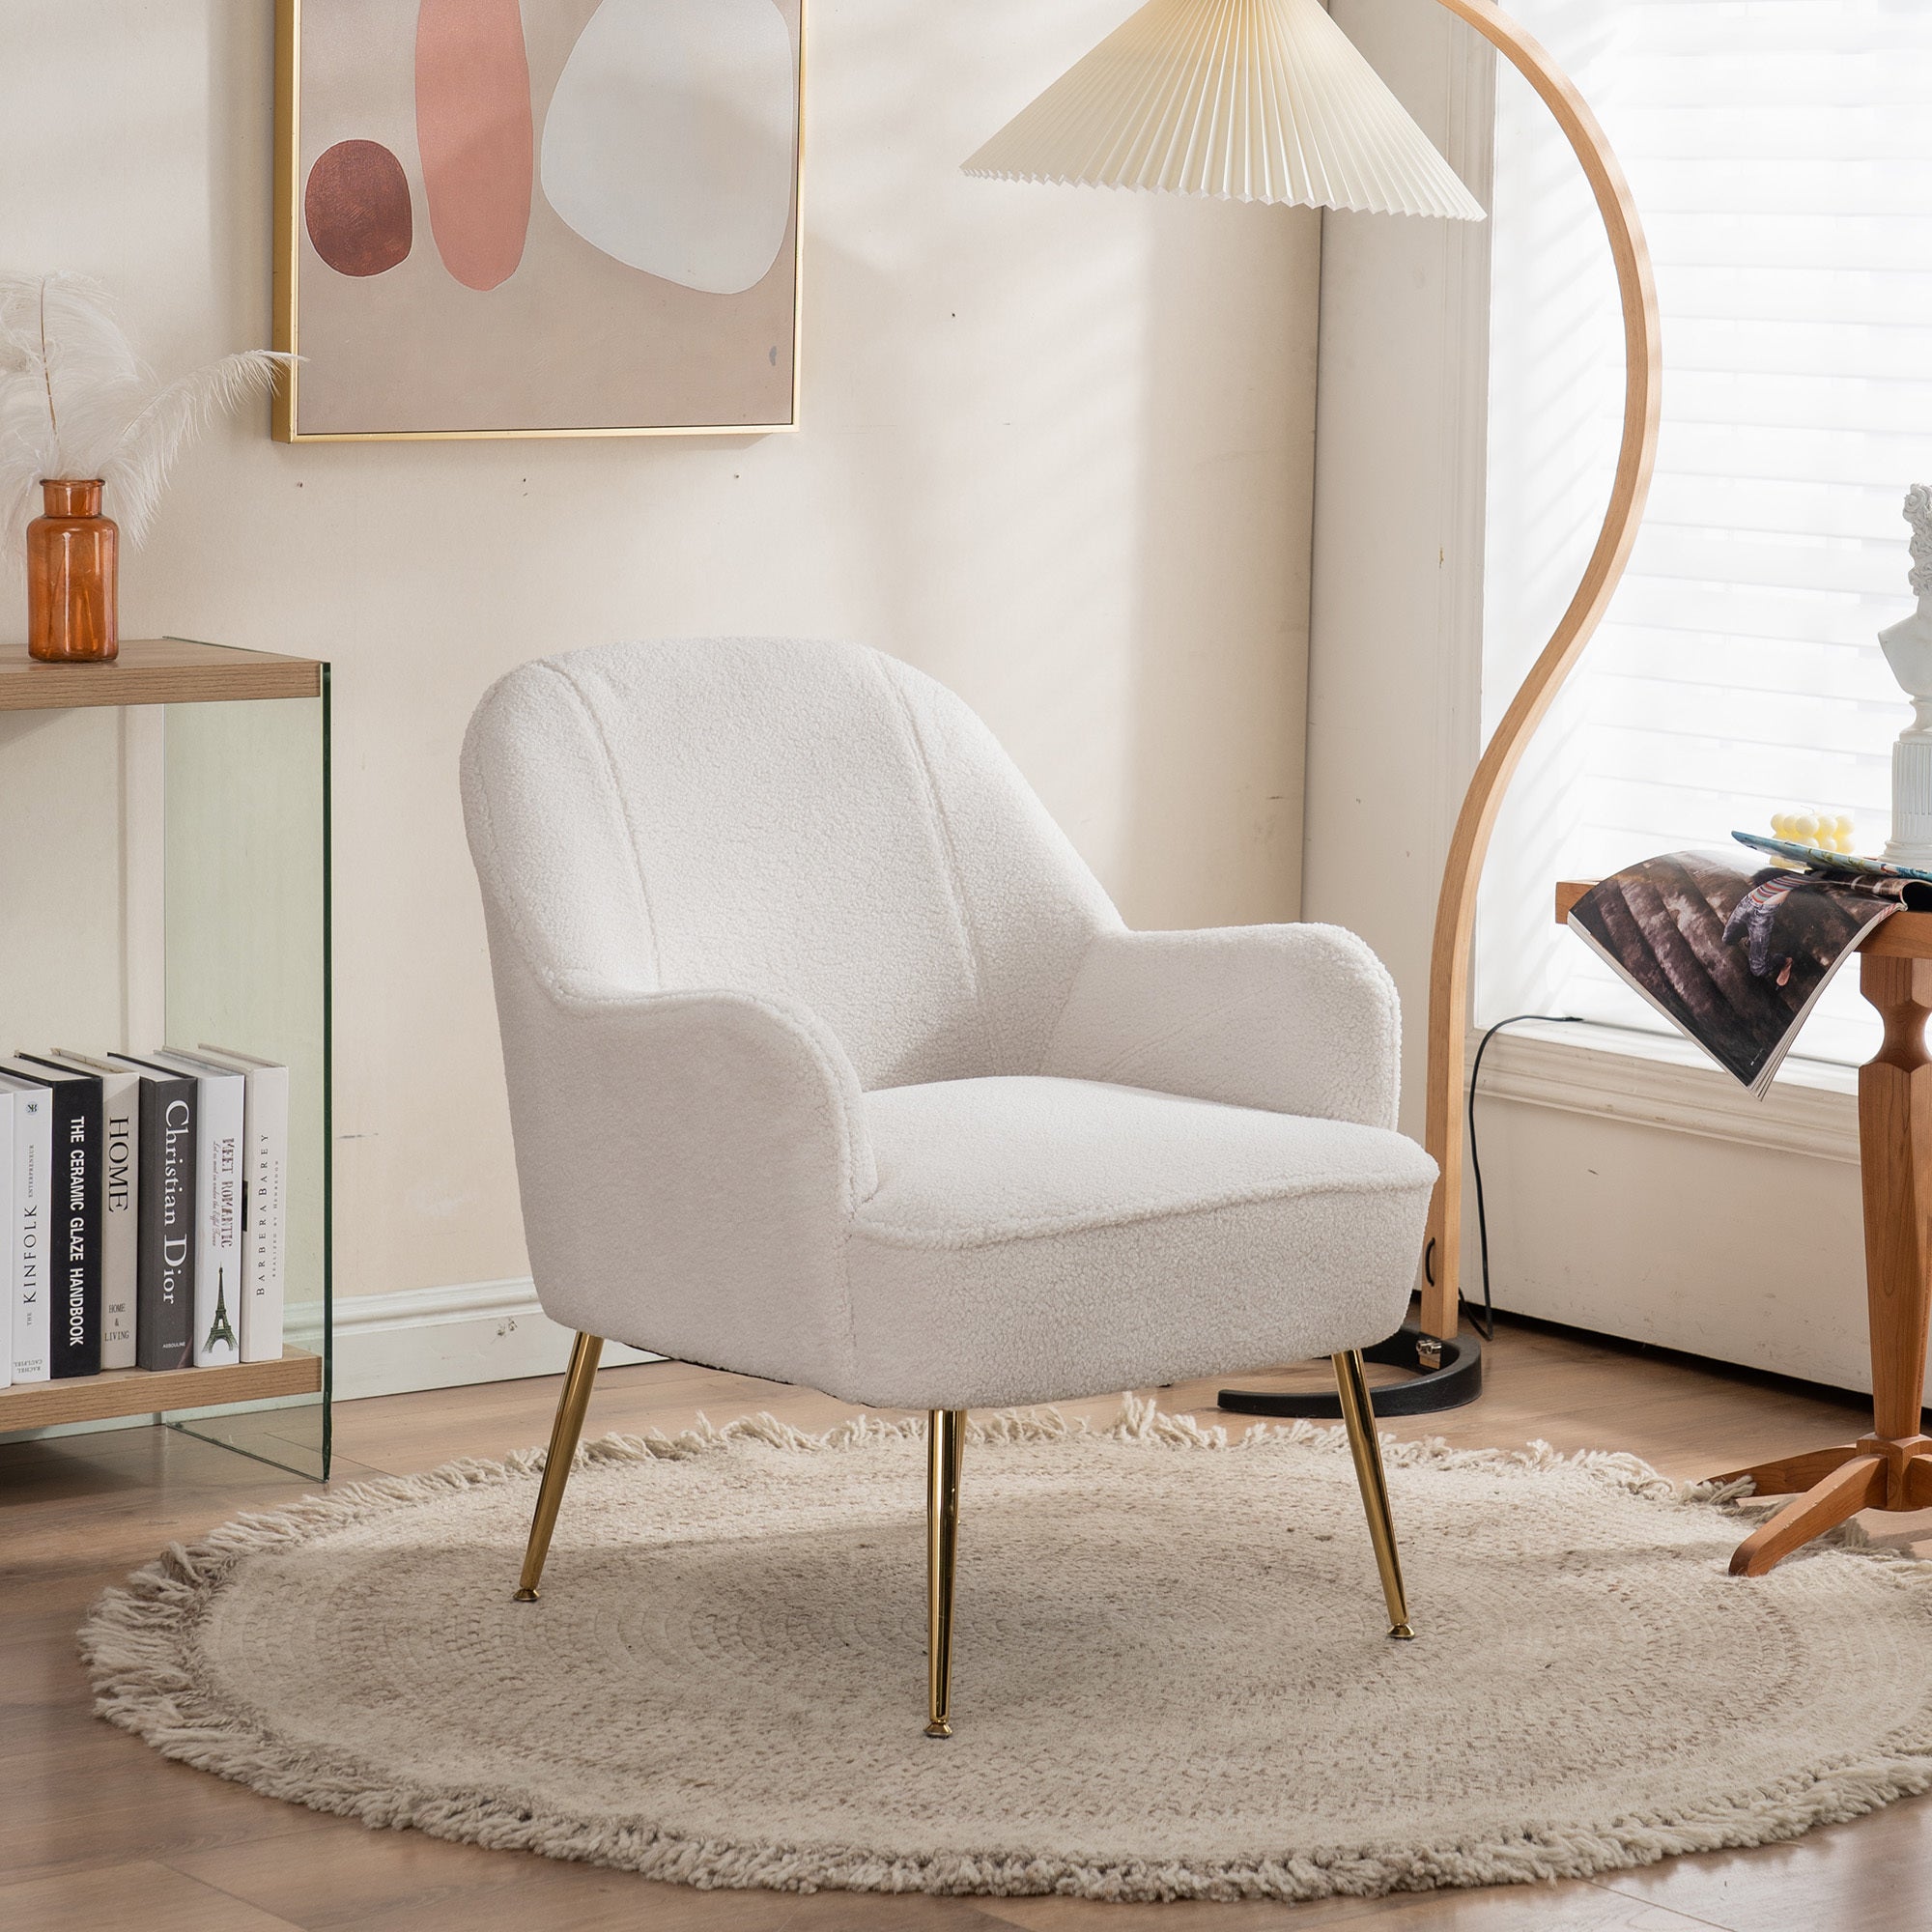 Modern Soft White Teddy Fabric Ergonomics Accent Chair With Gold Legs And Adjustable Legs - Ivory